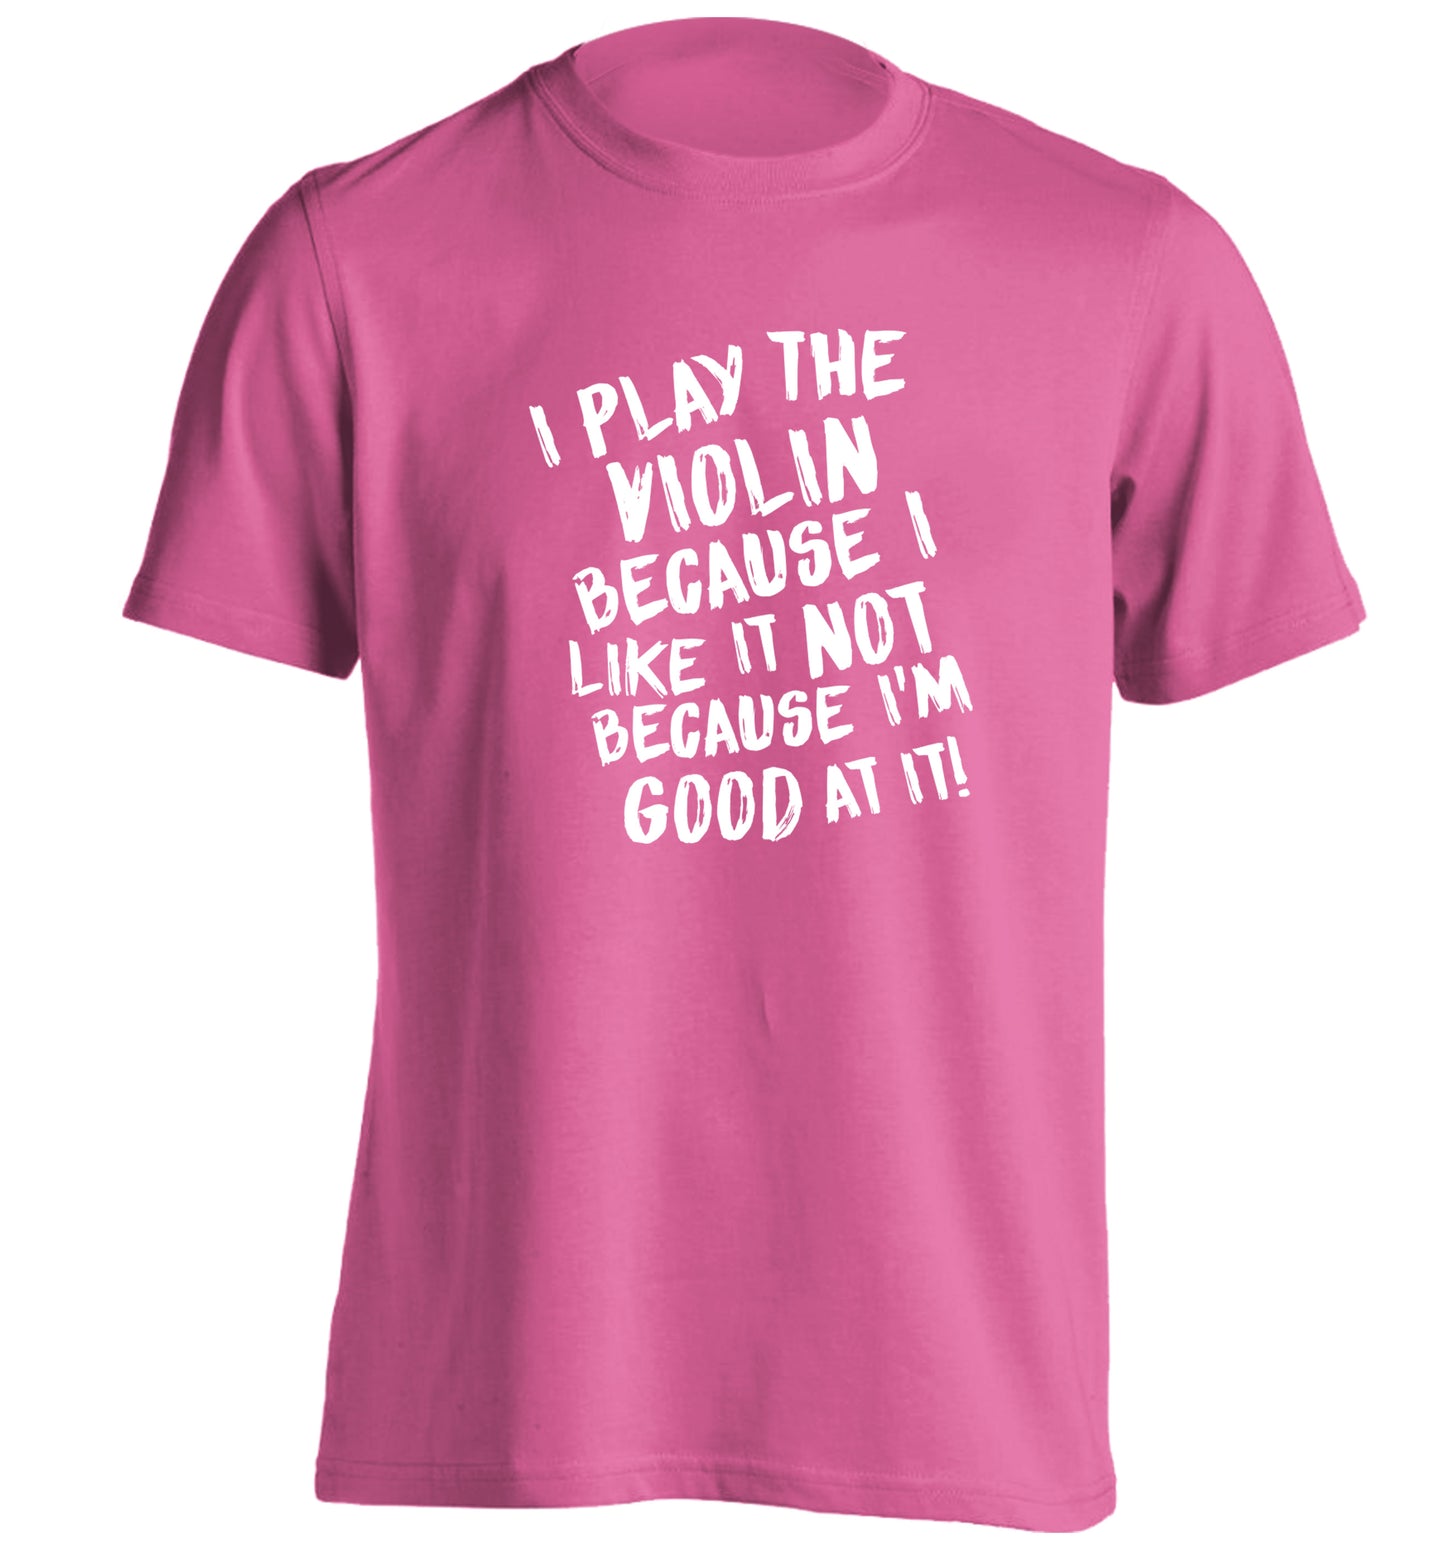 I play the violin because I like it not because I'm good at it adults unisex pink Tshirt 2XL